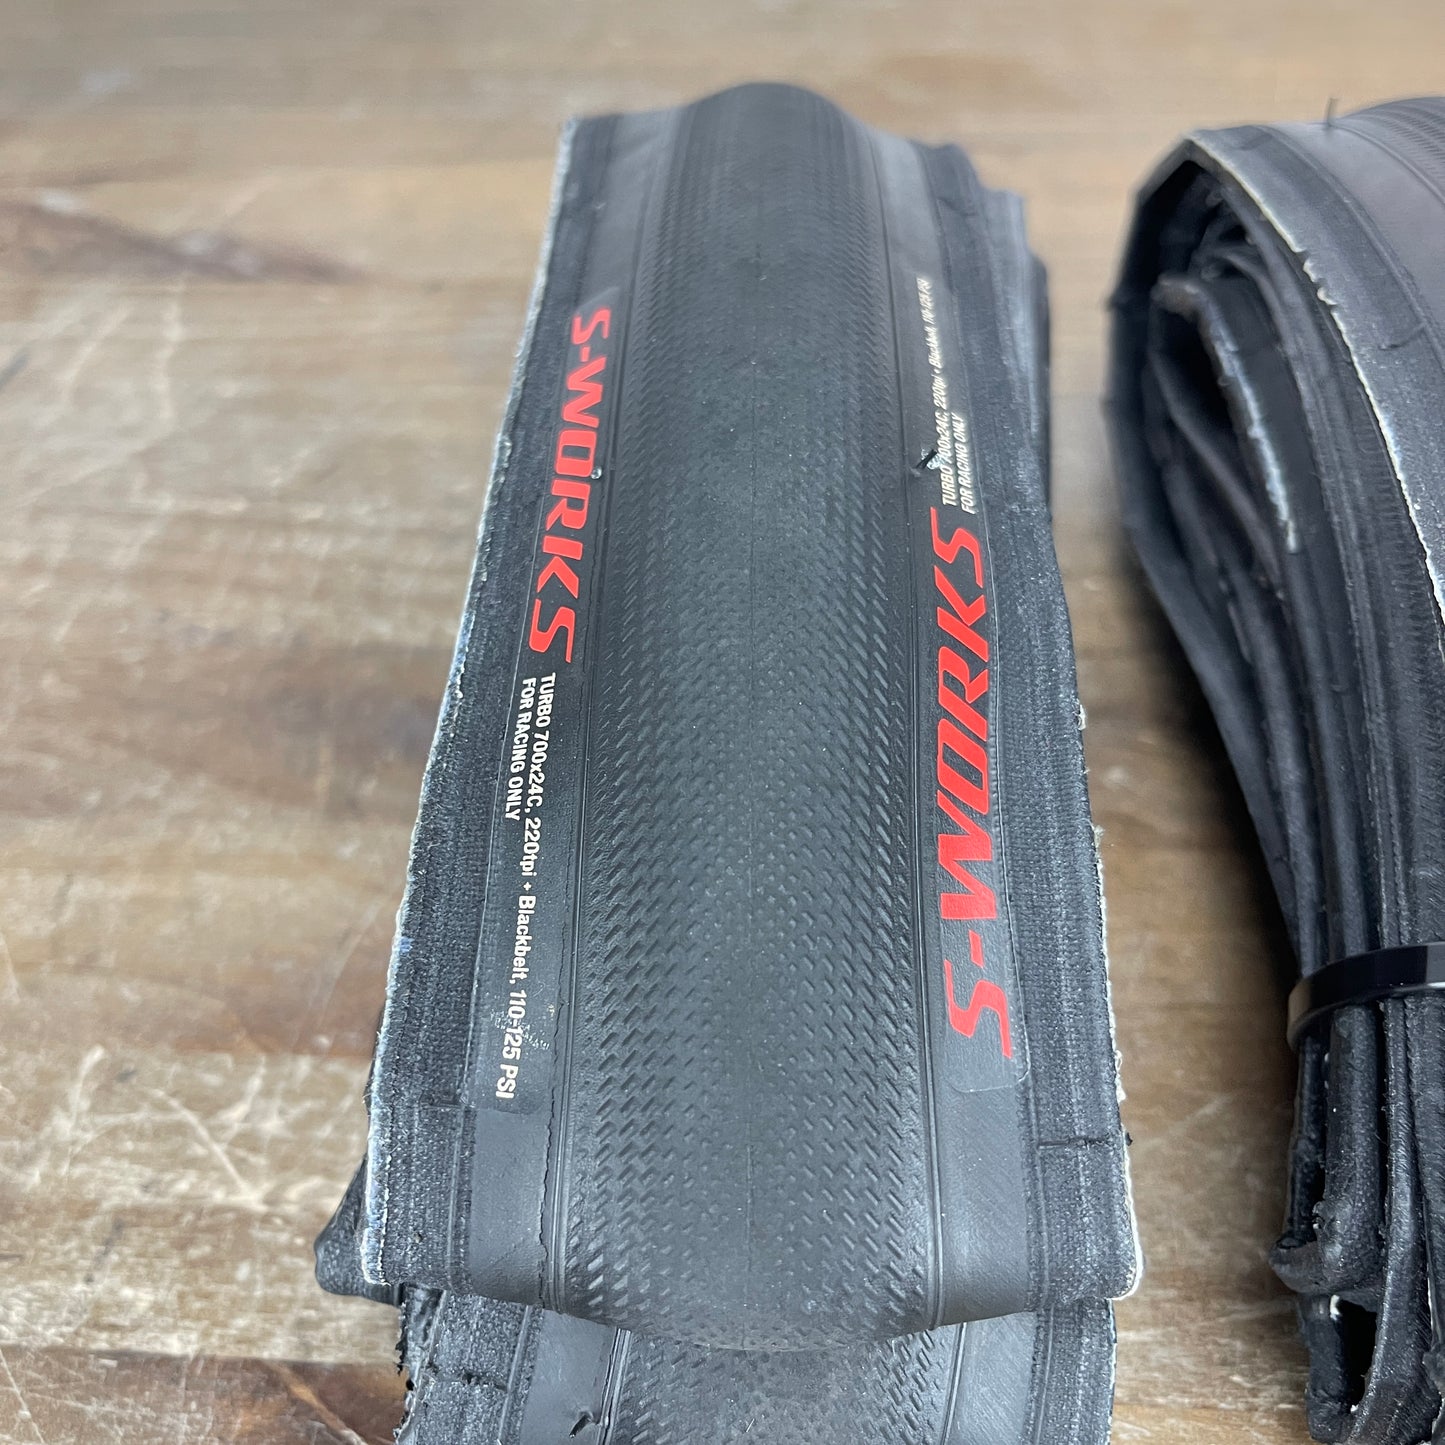 Pair Specialized S-works Turbo 700c x 24mm Clincher Road Bike Tires